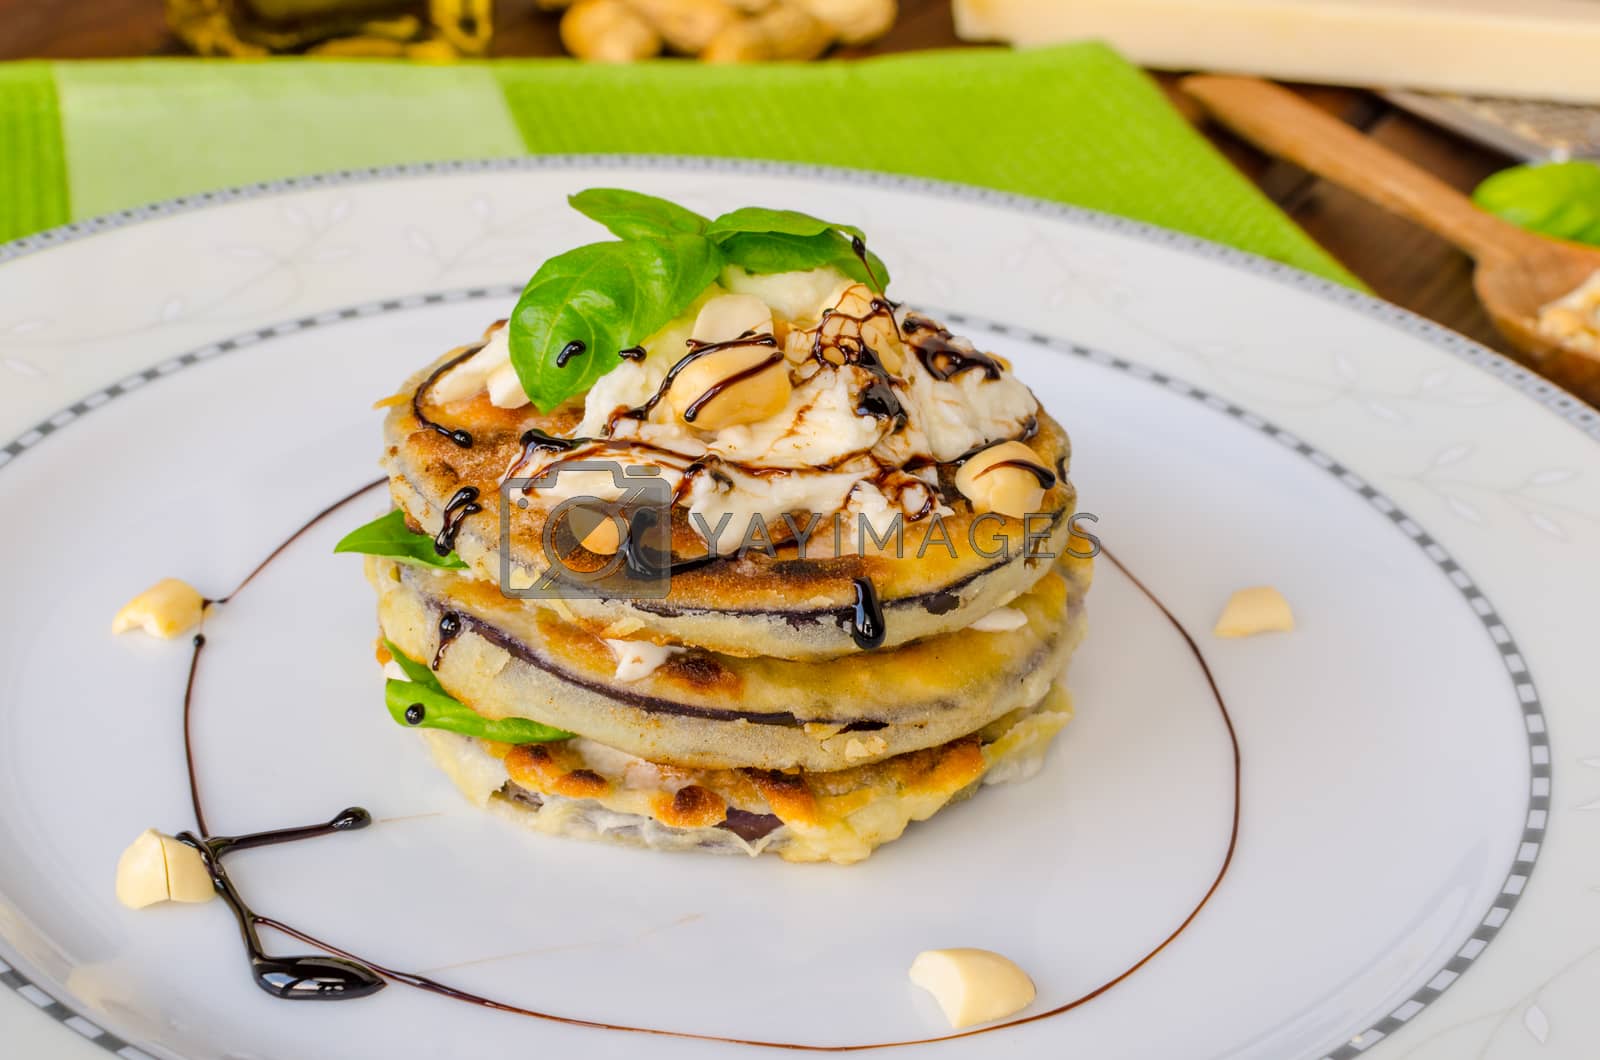 Royalty free image of Grilled eggplant with feta cheese,parmesan basil, nuts by Peteer